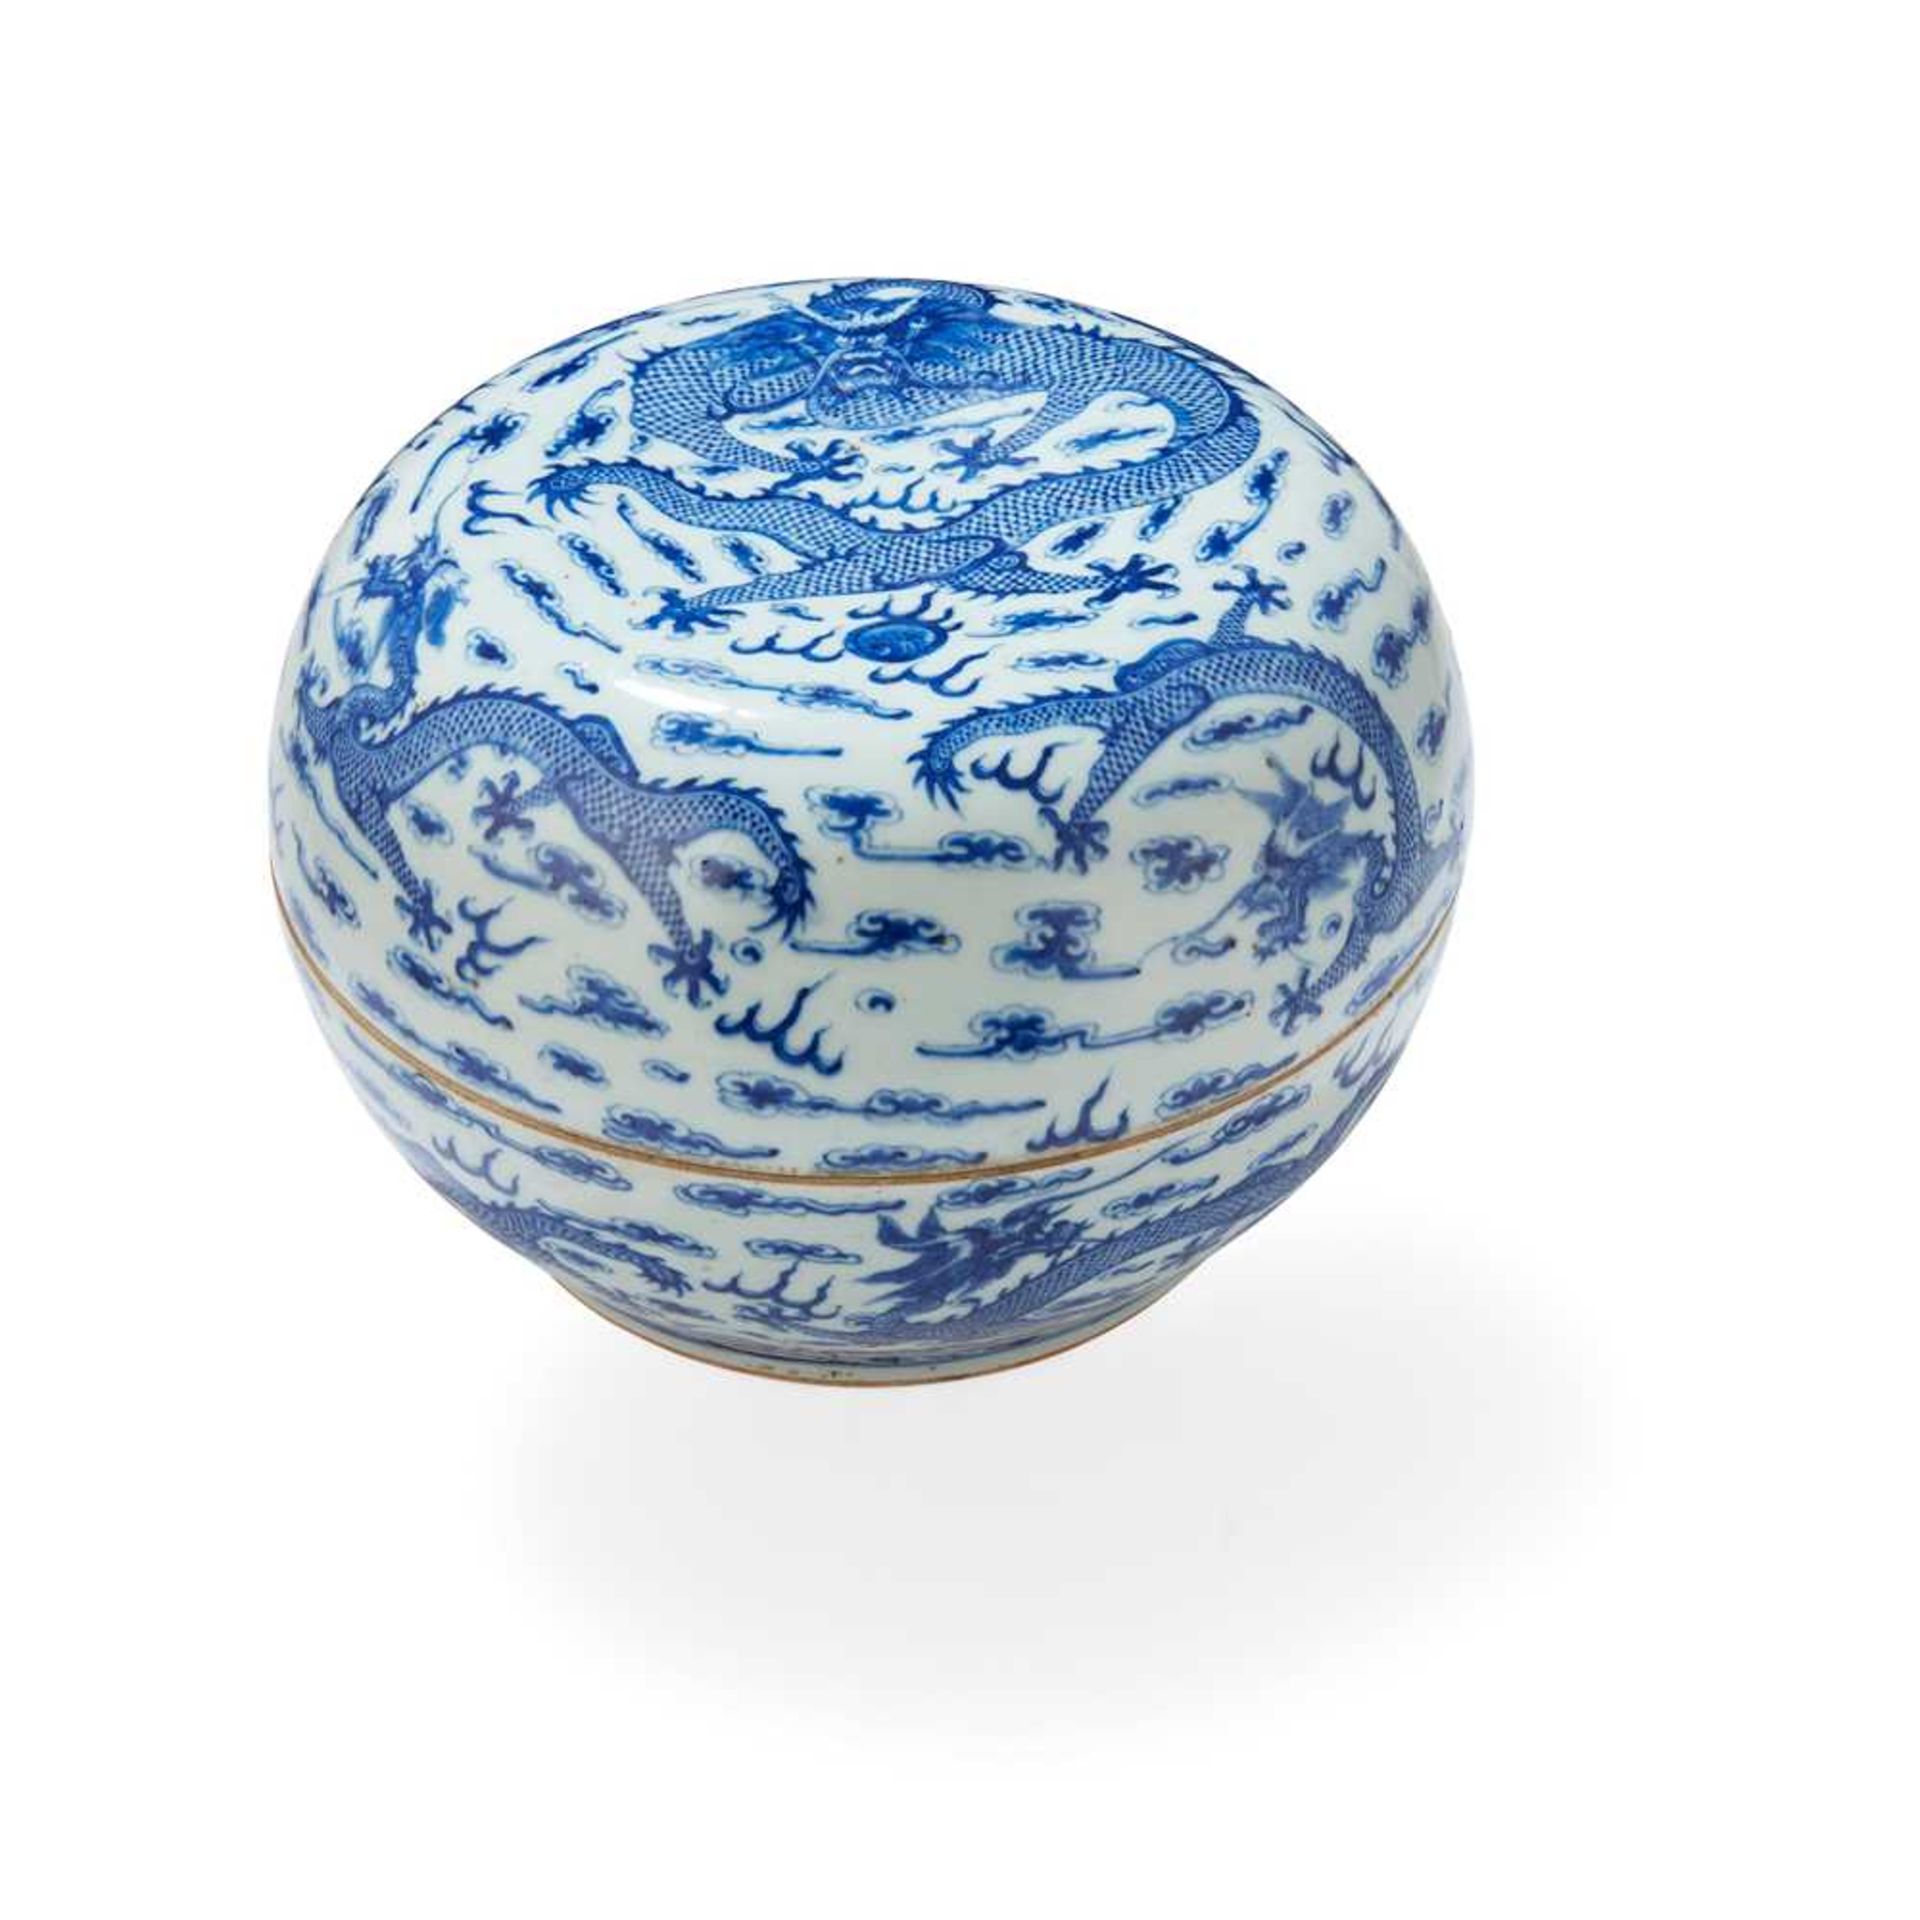 BLUE AND WHITE 'DRAGON' CIRCULAR BOX AND COVER 19TH-20TH CENTURY